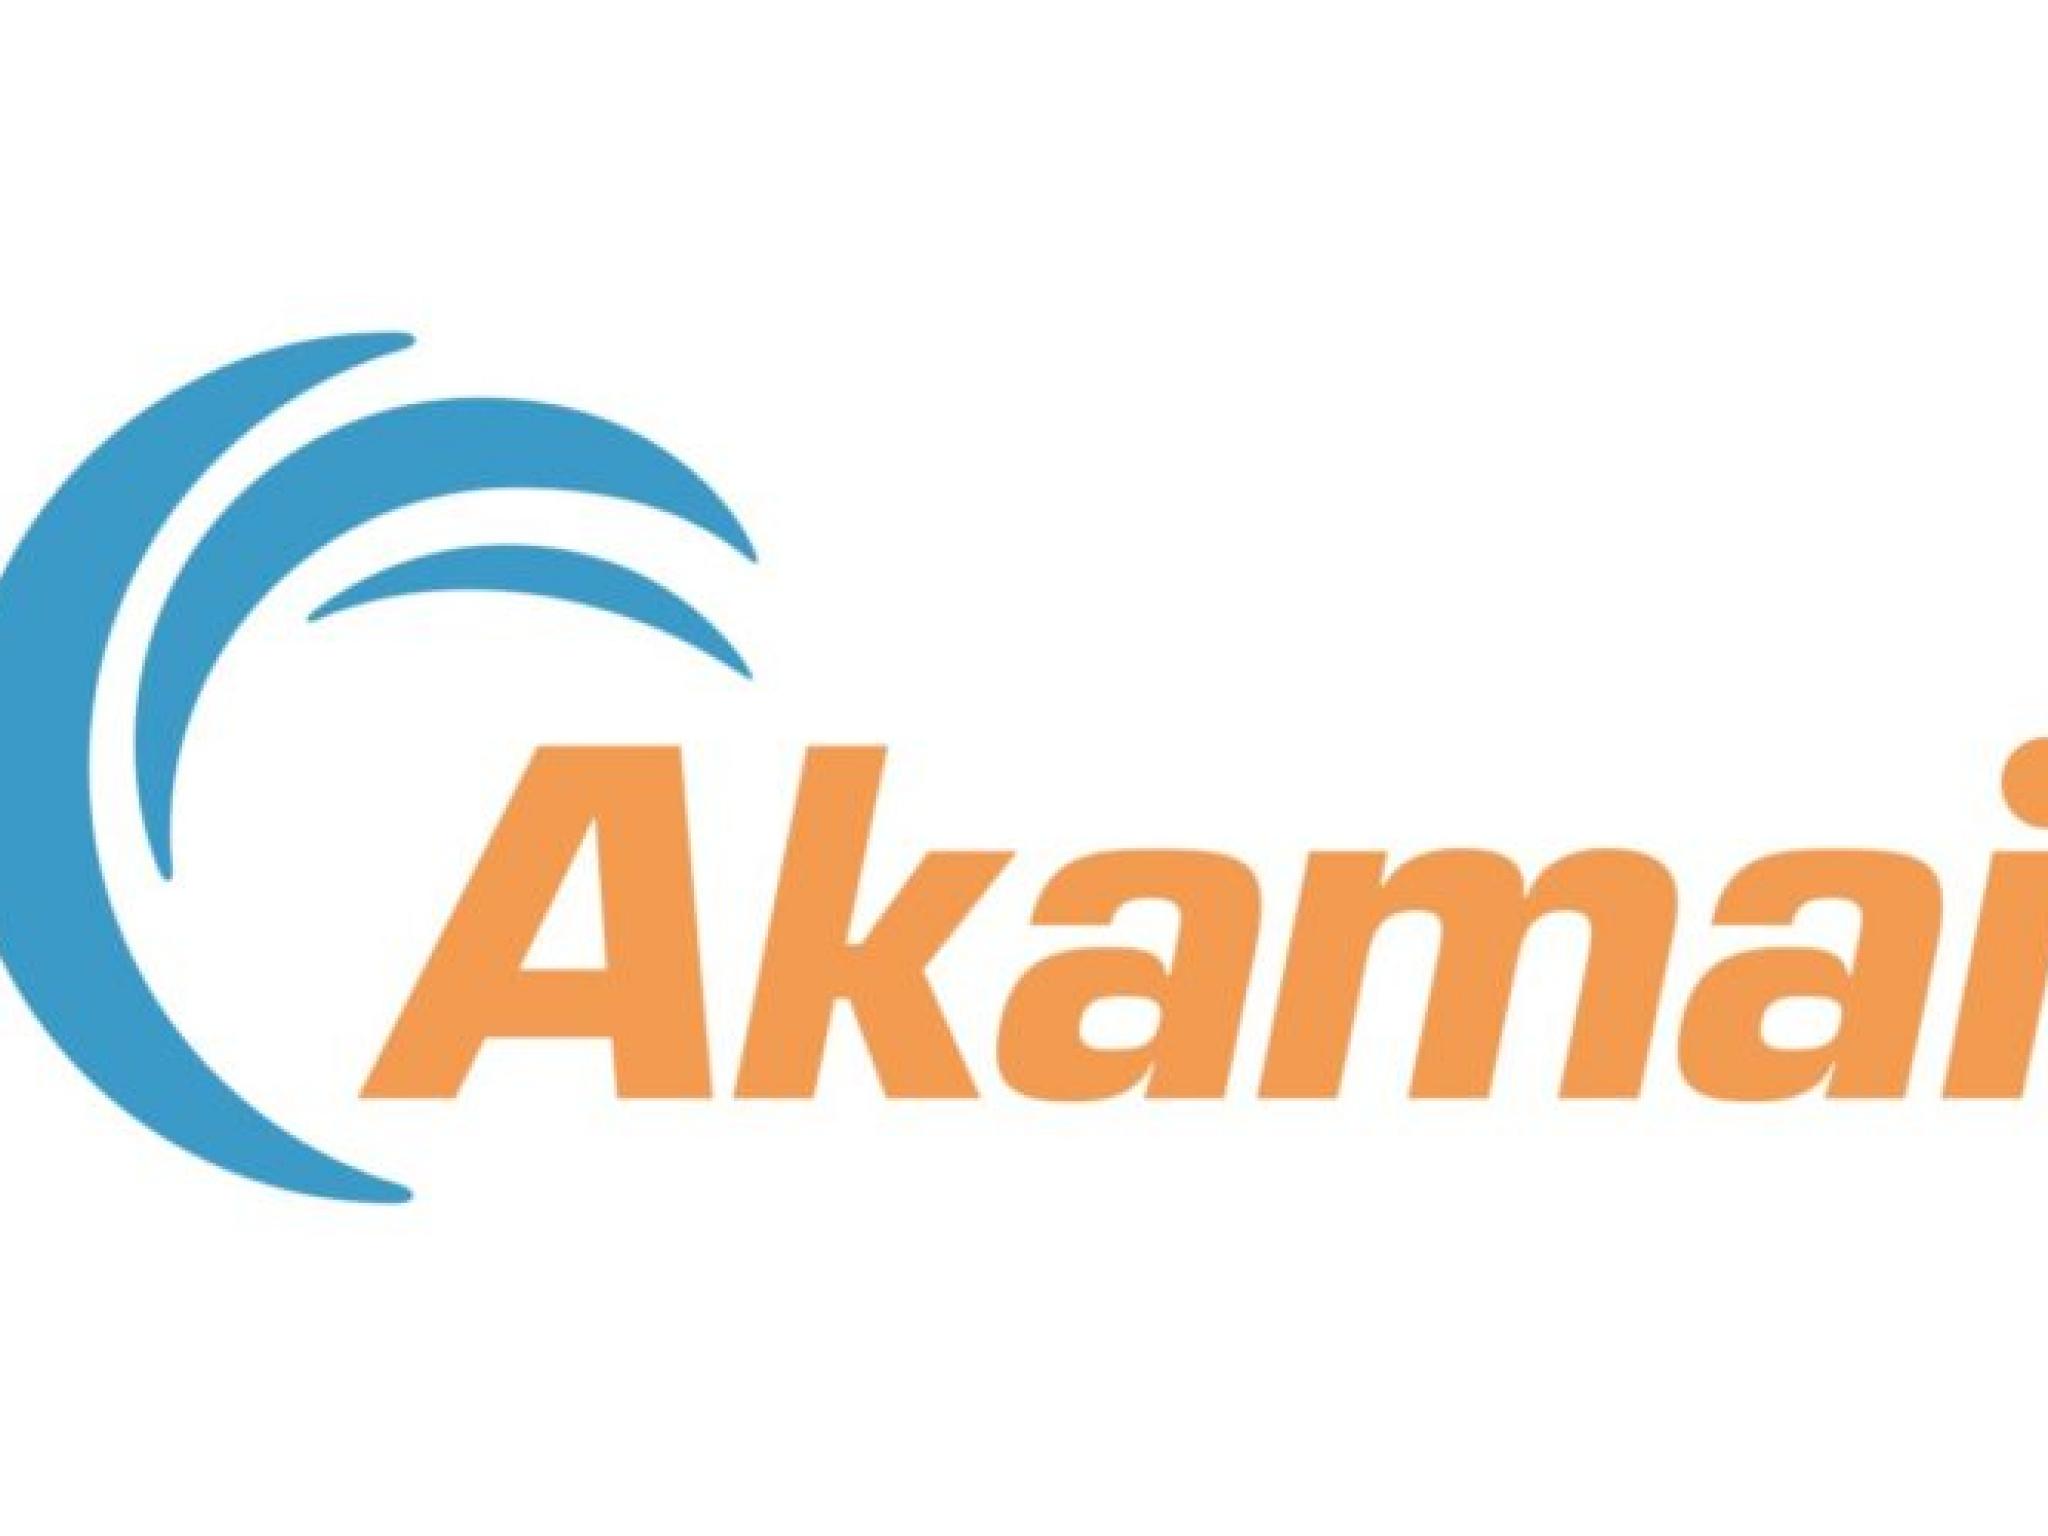  akamai-technologies-issues-weak-outlook-joins-applied-optoelectronics-jfrog-and-other-big-stocks-moving-lower-in-fridays-pre-market-session 